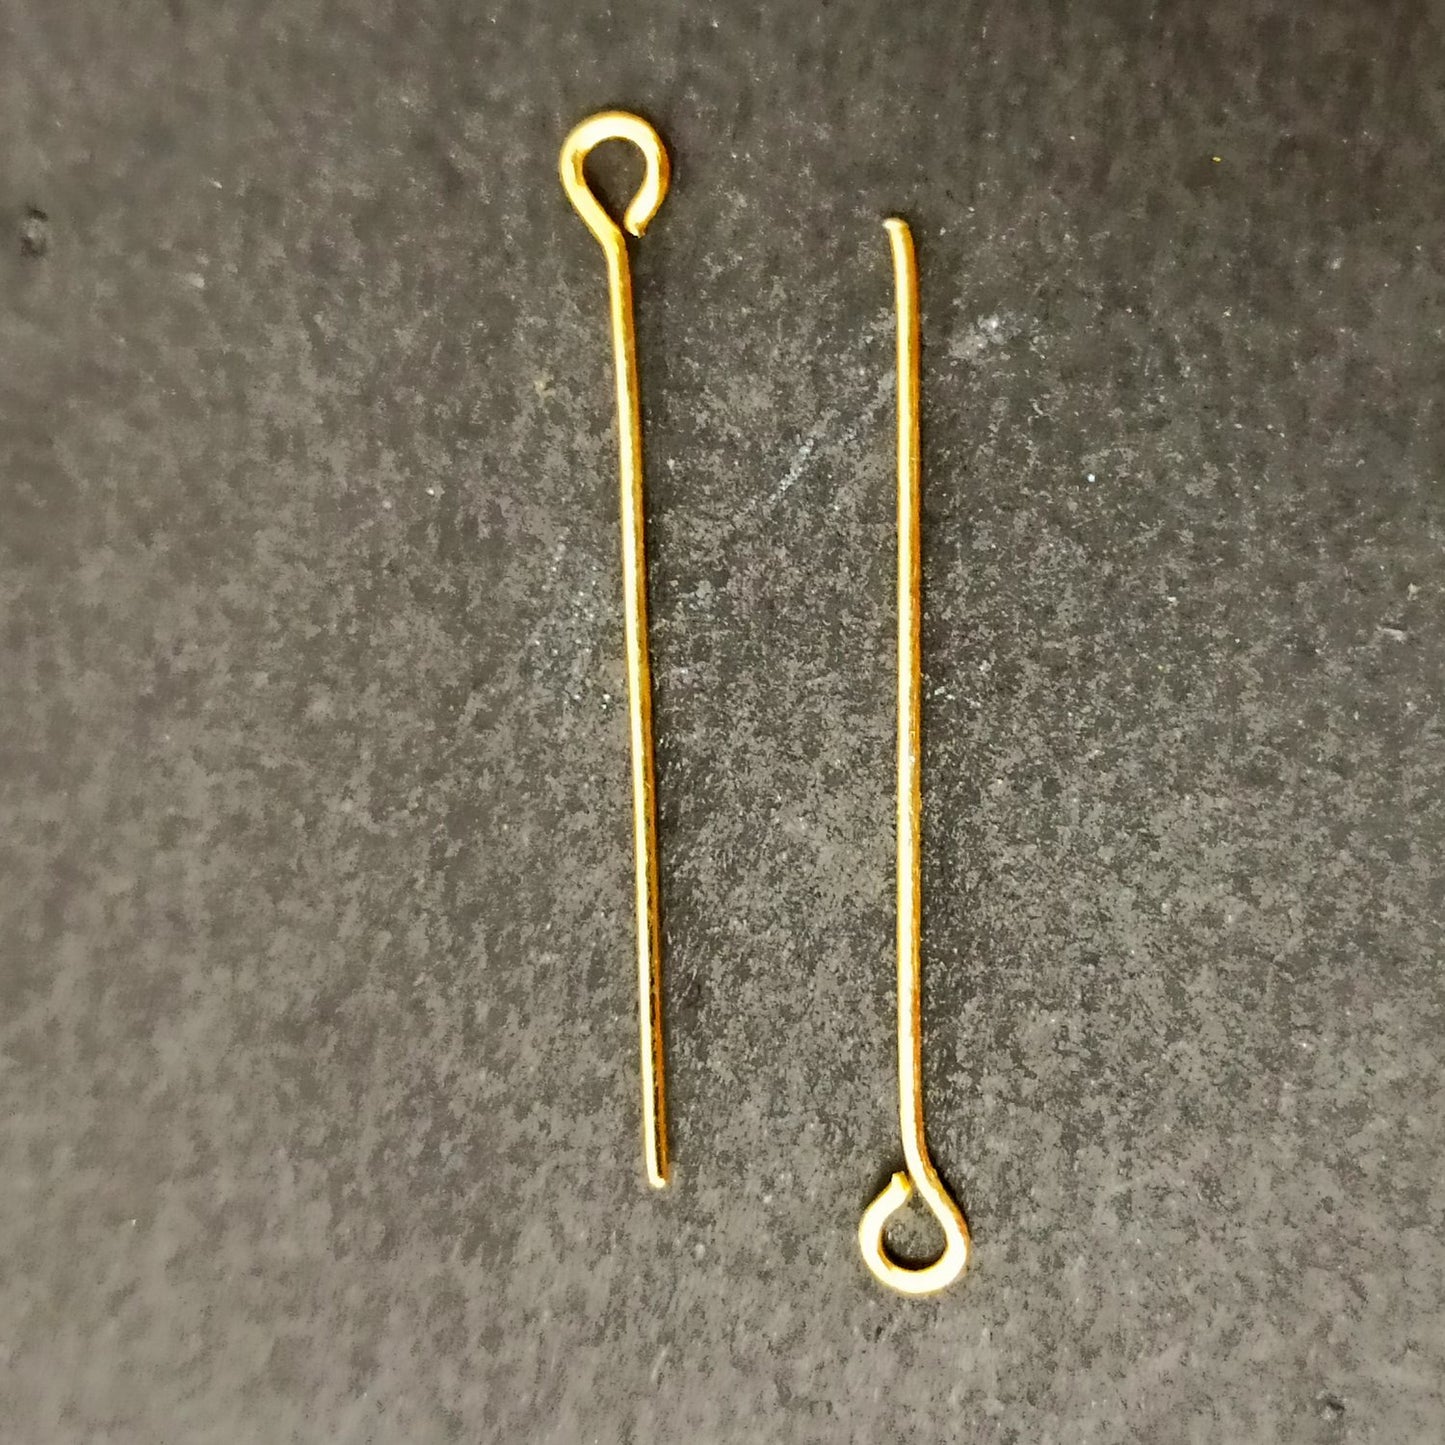 3.3 cm Golden Eye Pins for Making Earrings and Jewellery (25 Pcs) - 96-32